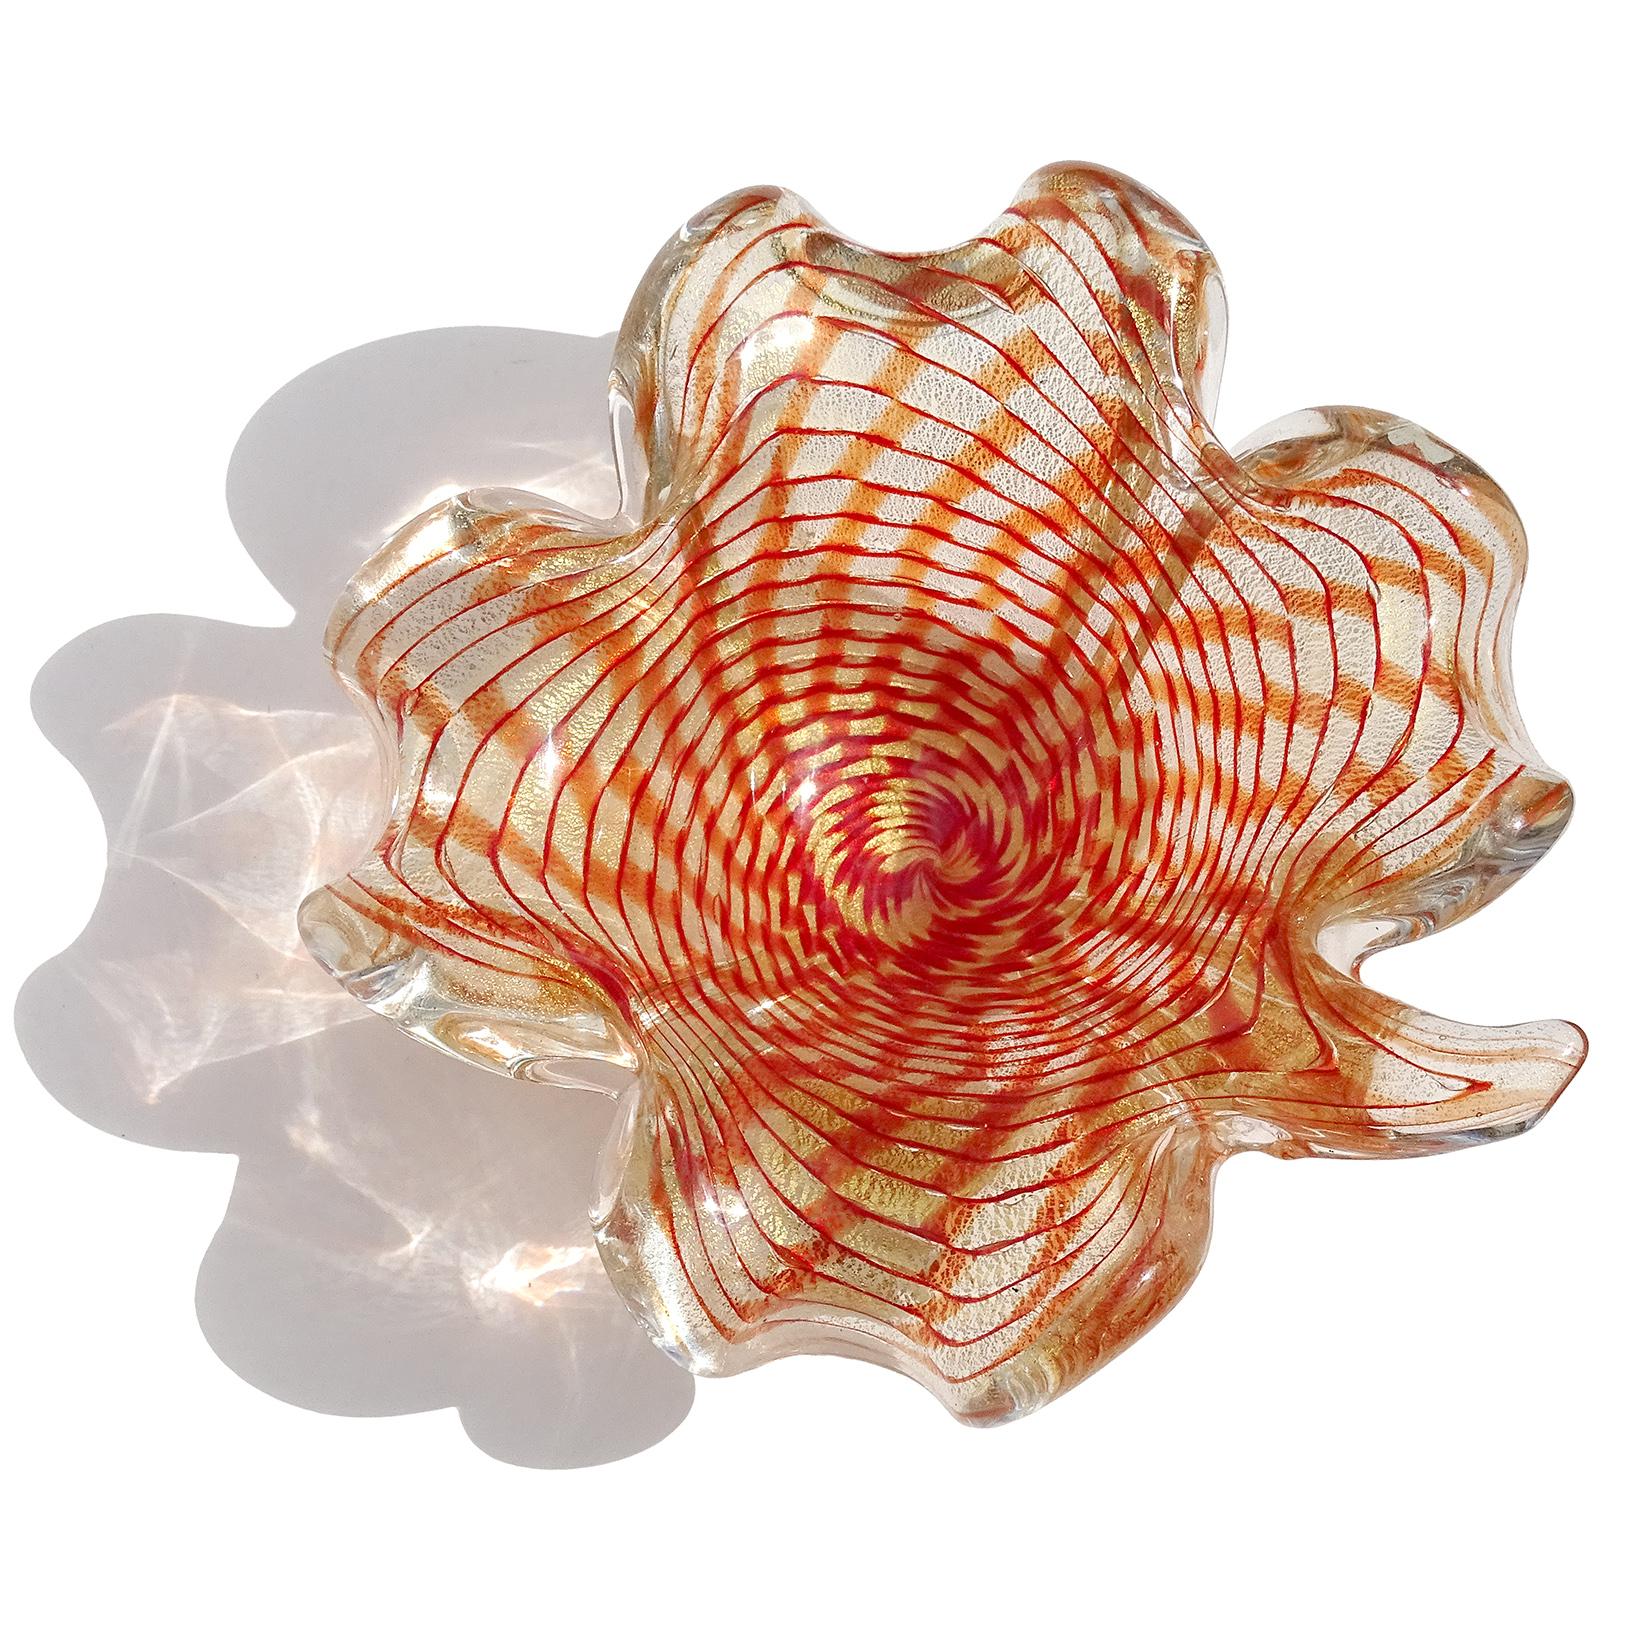 Beautiful Murano hand blown red orange and gold flecks Italian art glass leaf shaped bowl. Attributed to the Barovier e Toso Company. The design looks like a spiderweb. Profusely covered in gold leaf. Made with thick glass. Can be used as a display